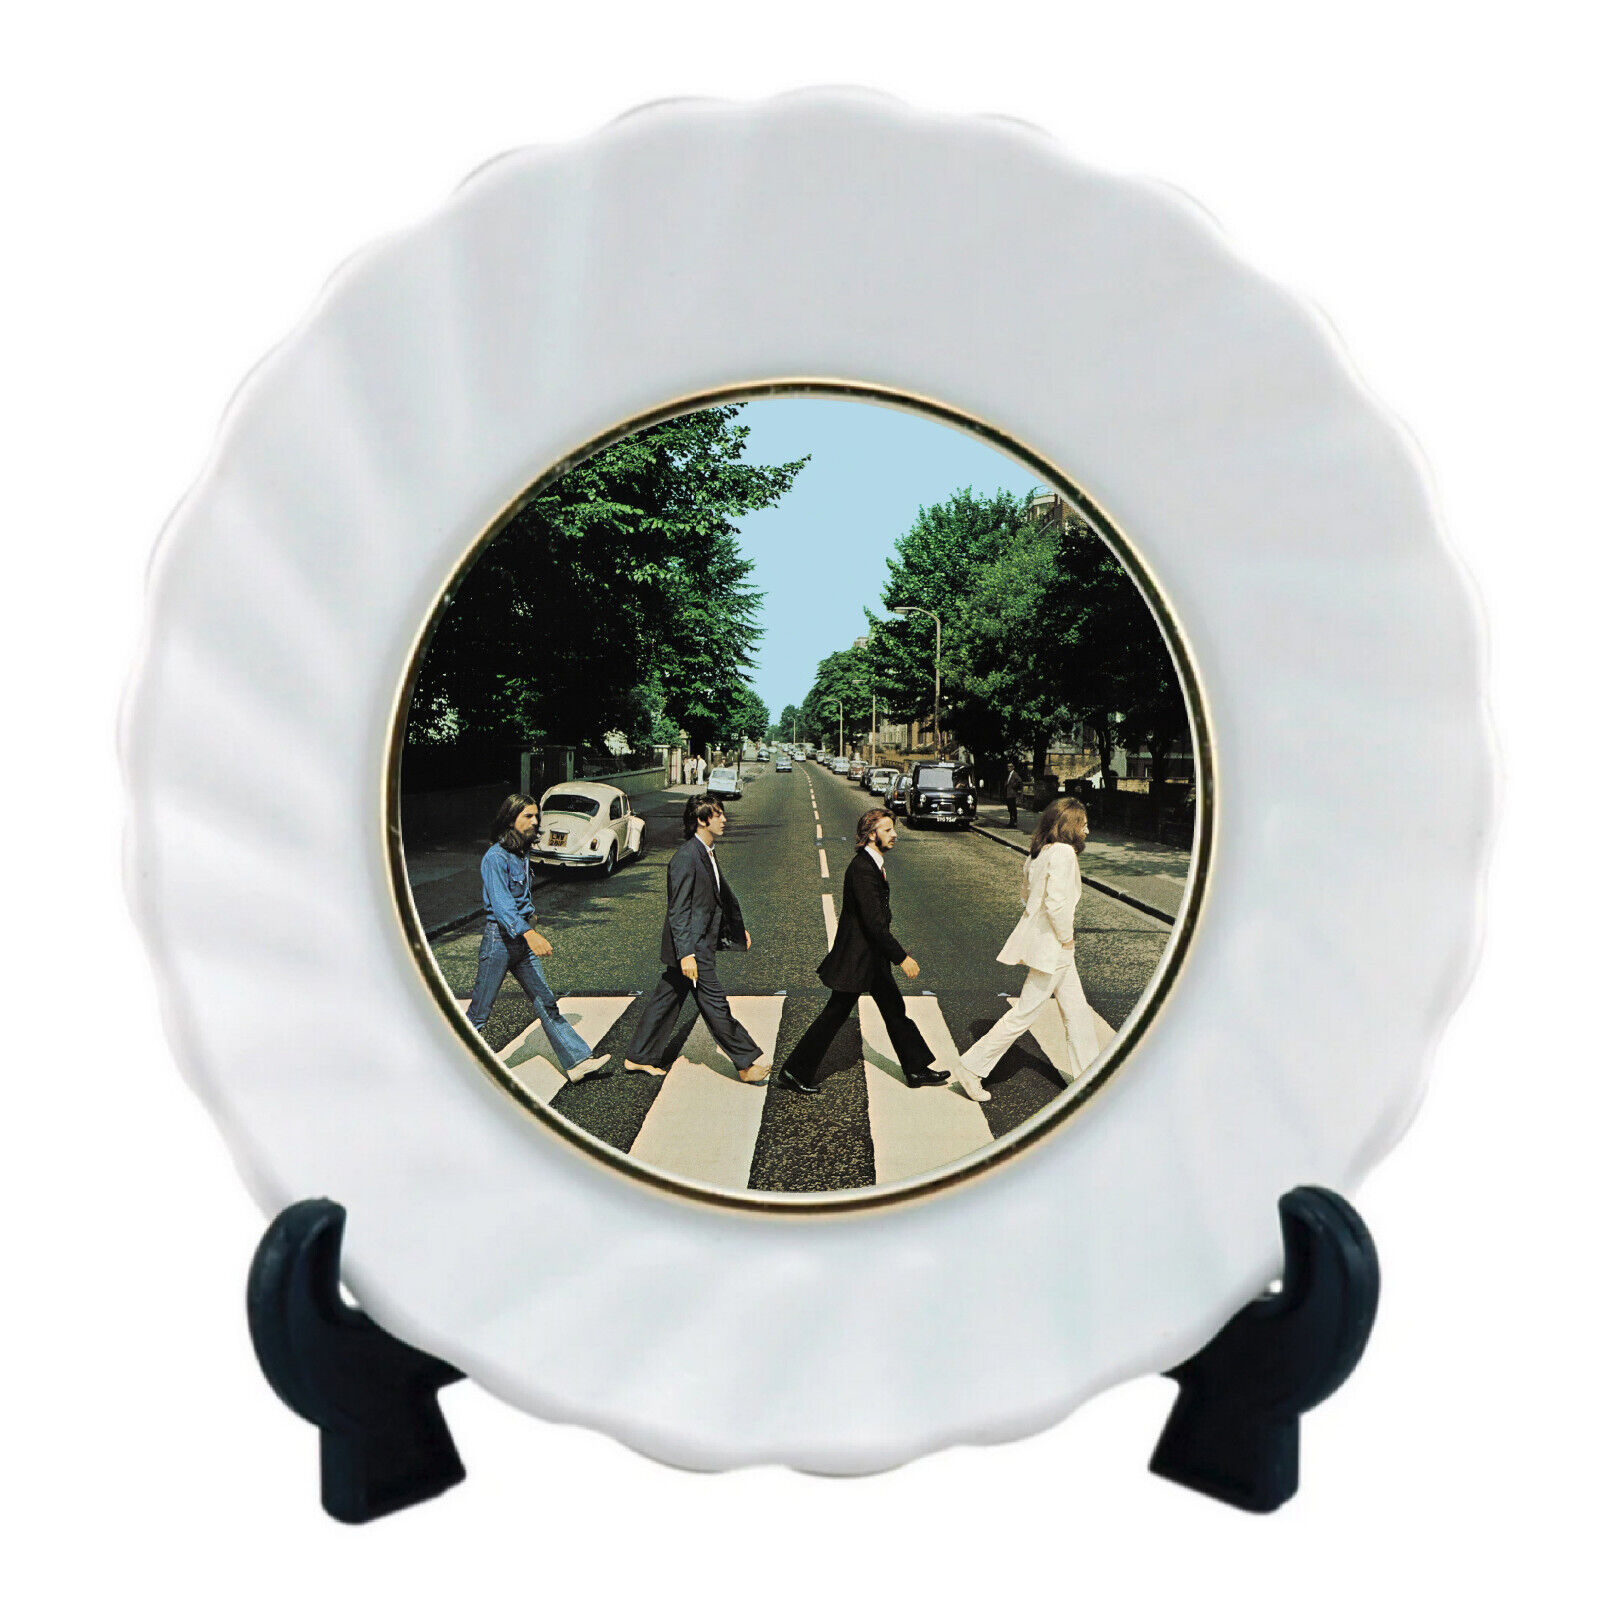 The Beatles Abbey Road Ceramic Plate Limited Edition Numbered with FREE stand